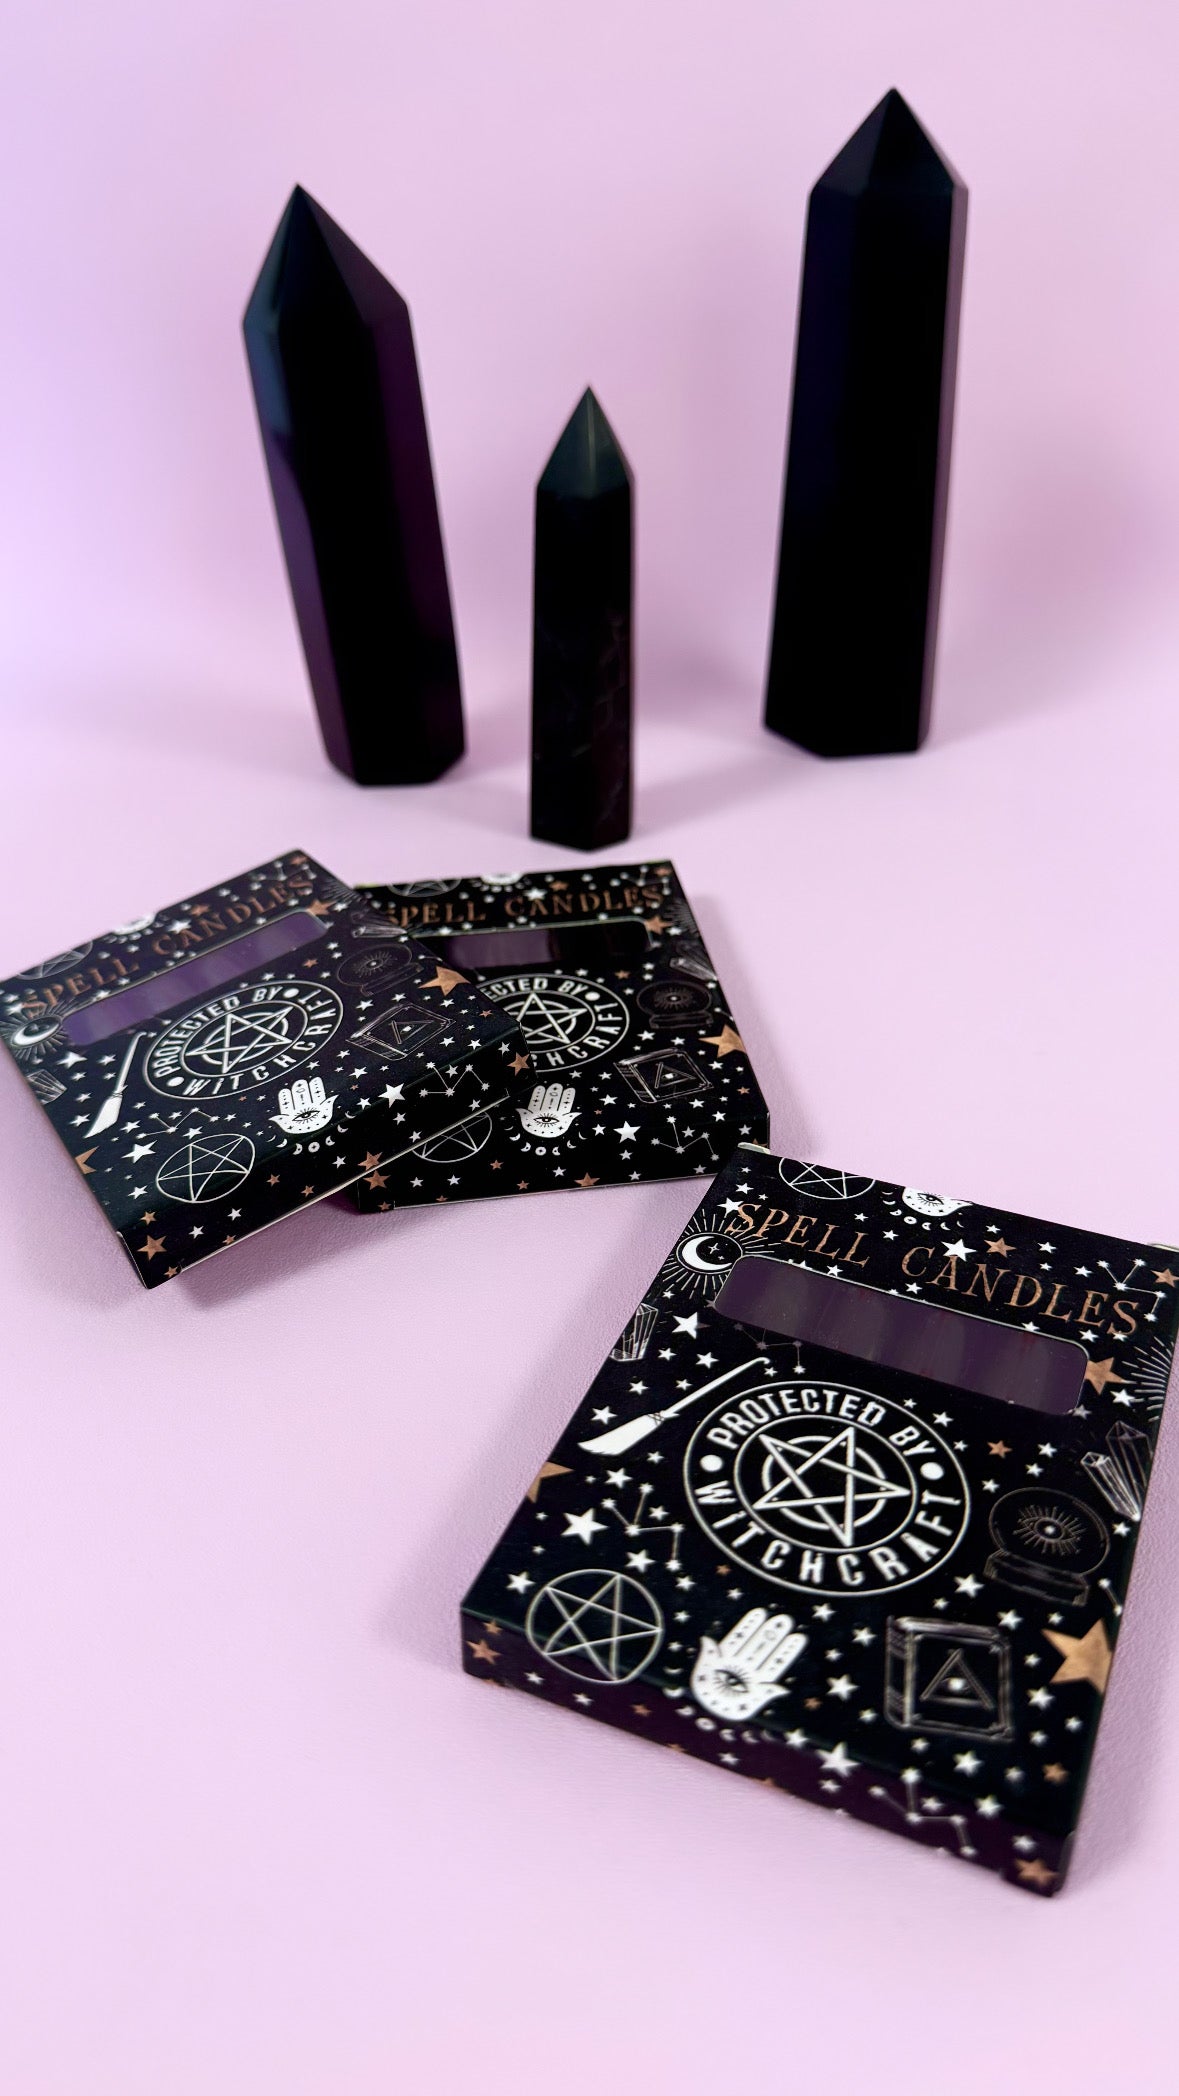 Protected by Witchcraft ☾  Sorte SPELL CANDLES ☾ 10x7,5x1 cm pakke med 6 lys